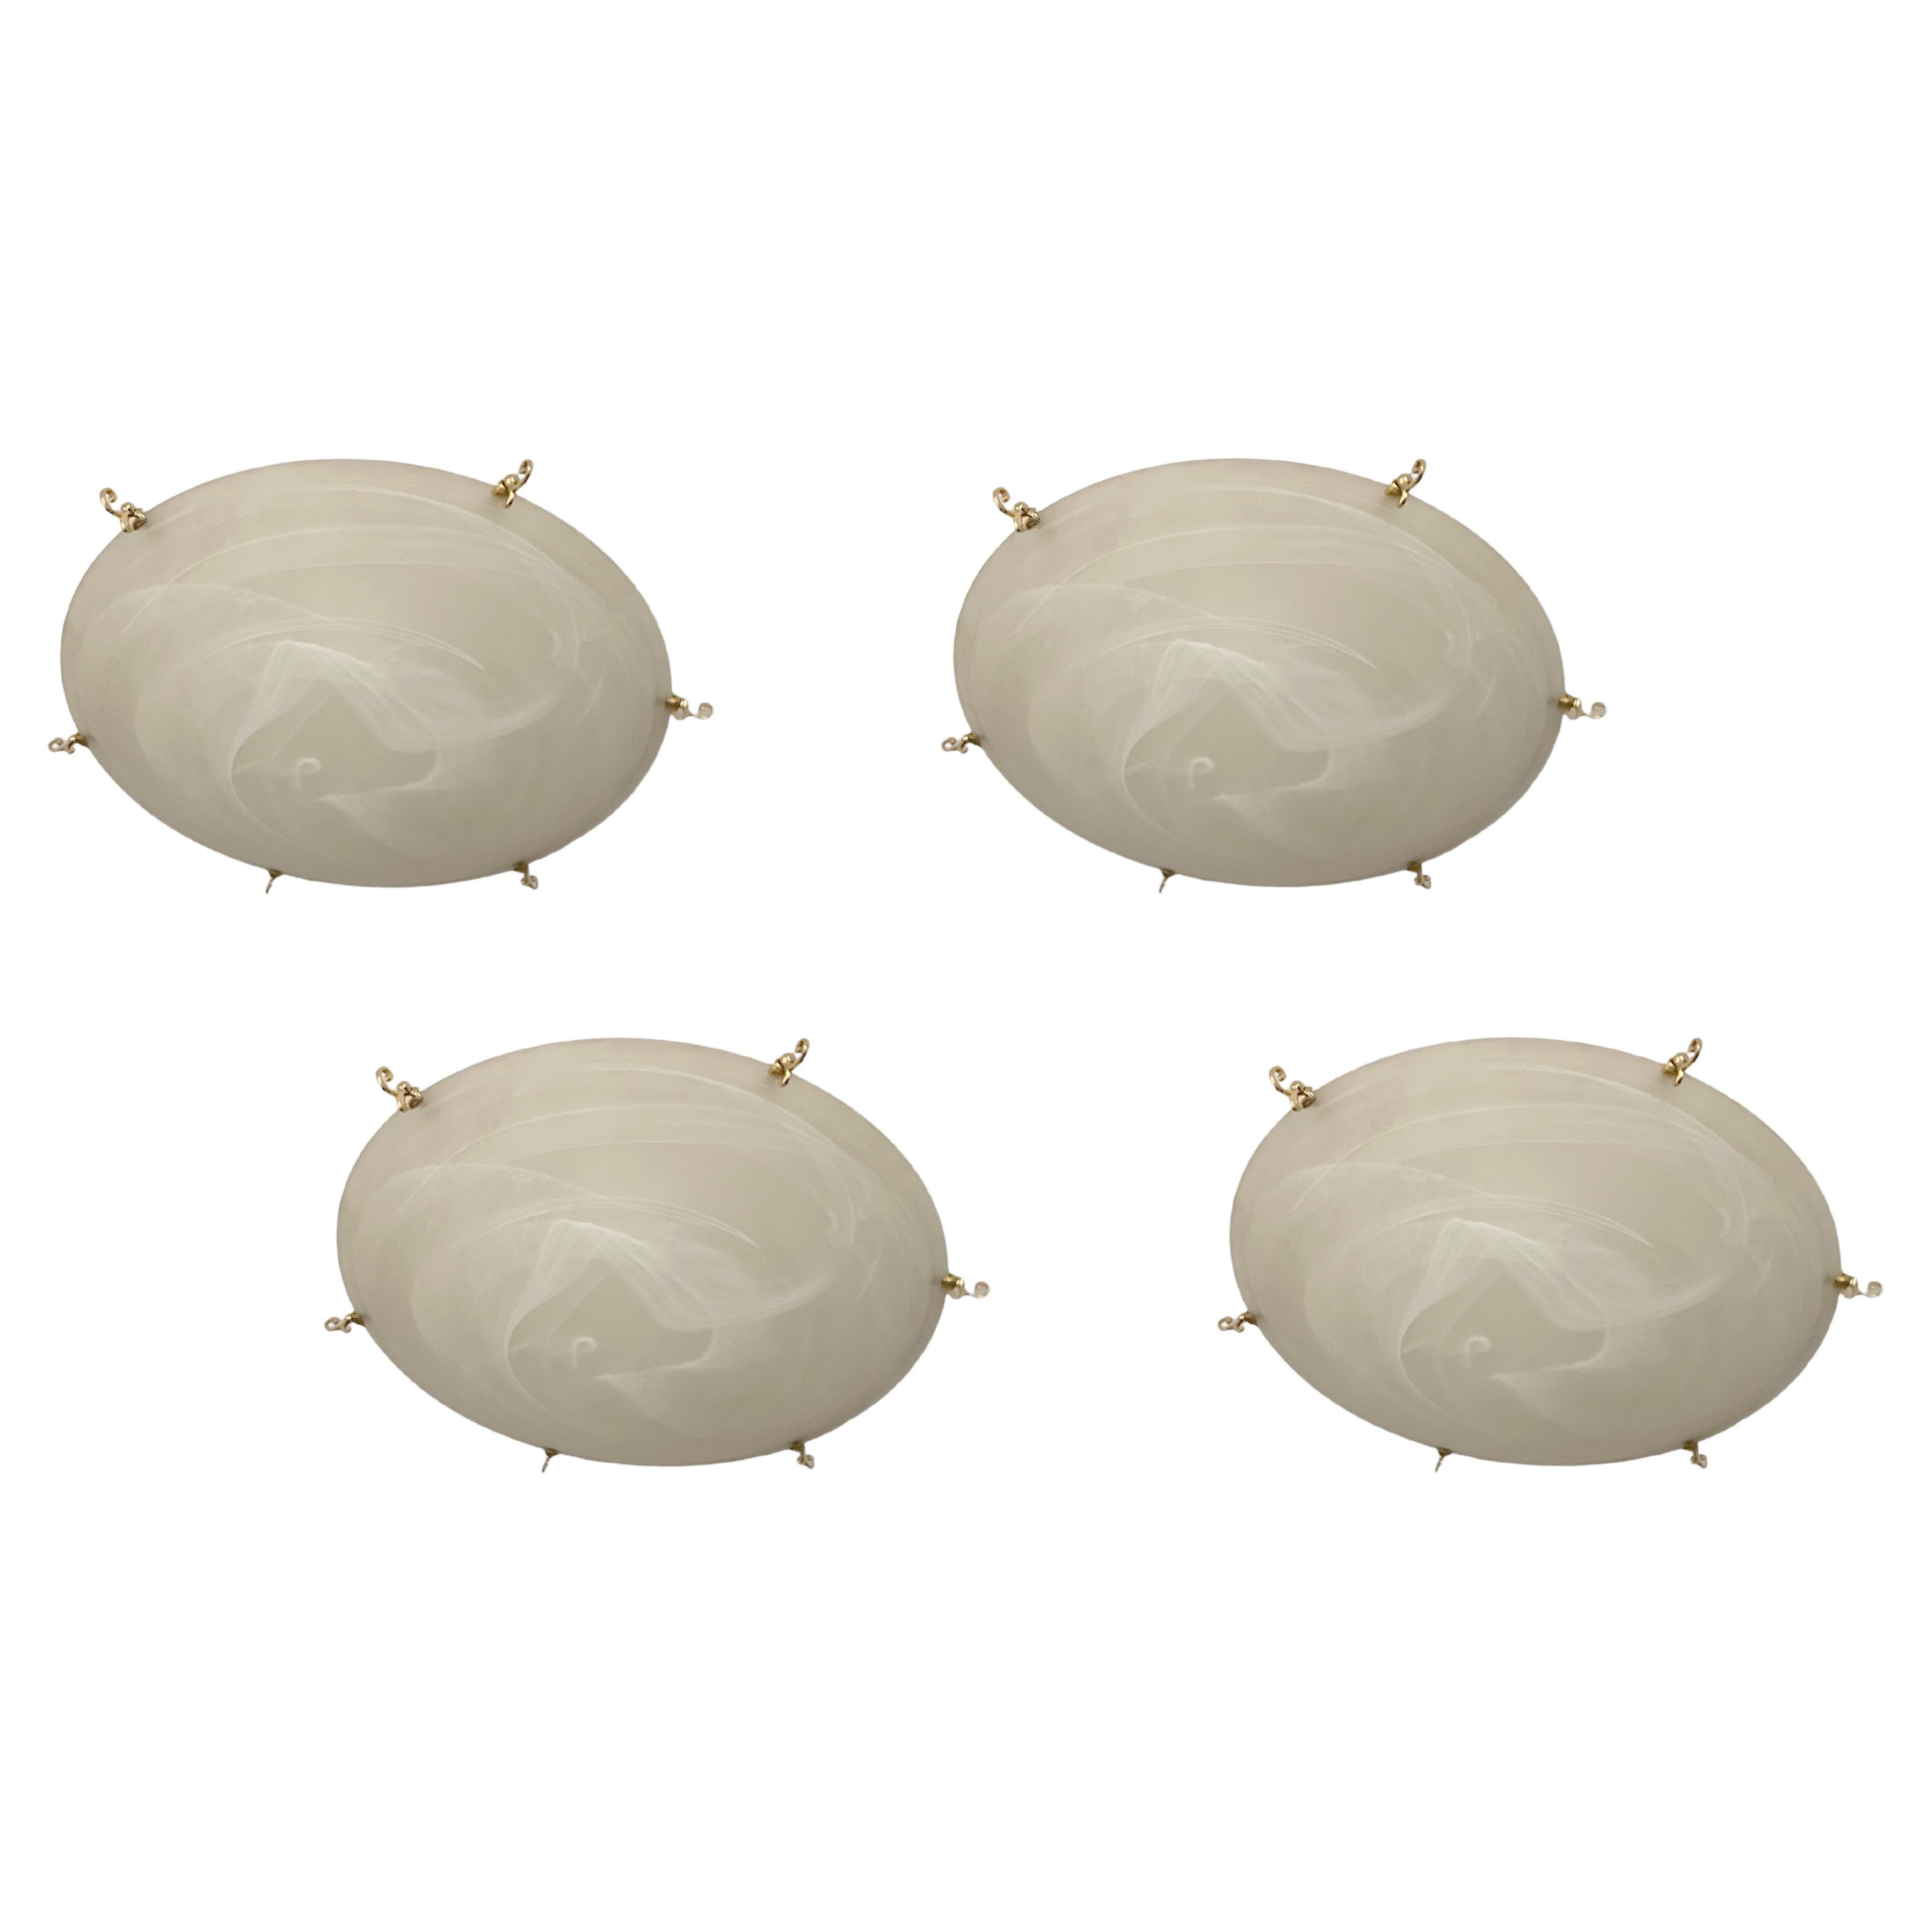 4 Amaizing Ceiling Lights, Italian, in Murano , Style, Art Deco, 1930 For Sale